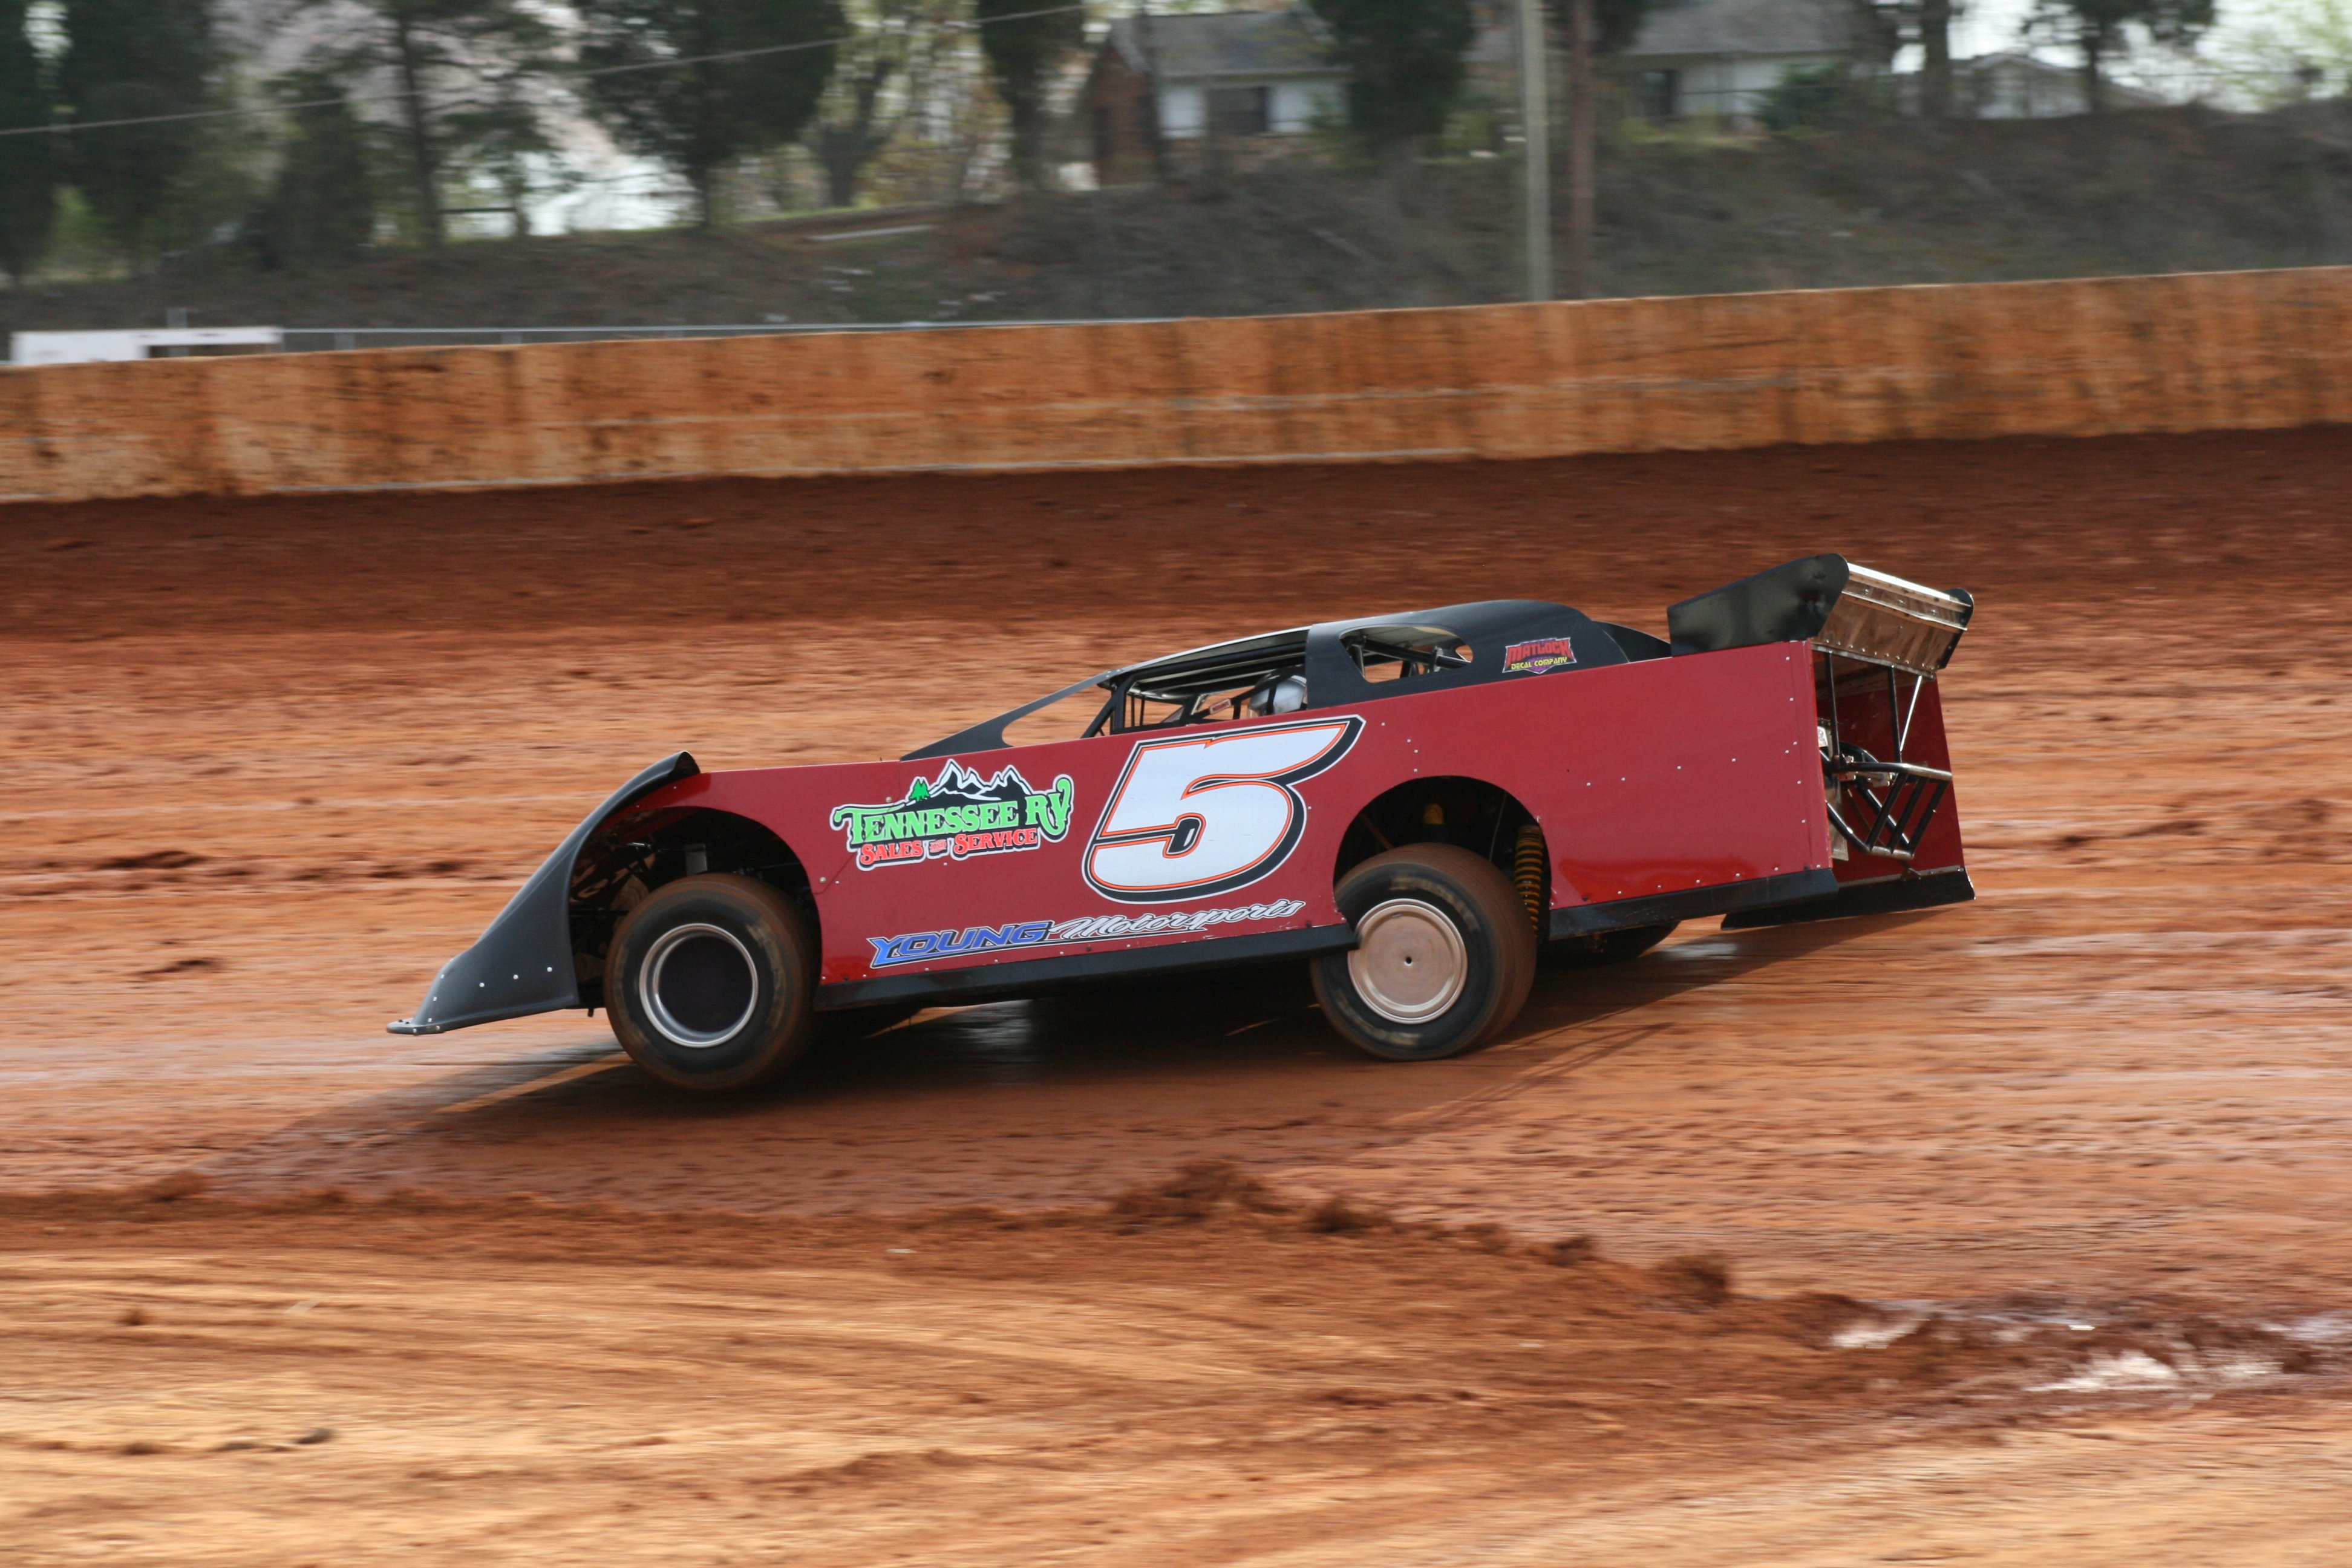 Dirt late model wallpaper. All HD picture